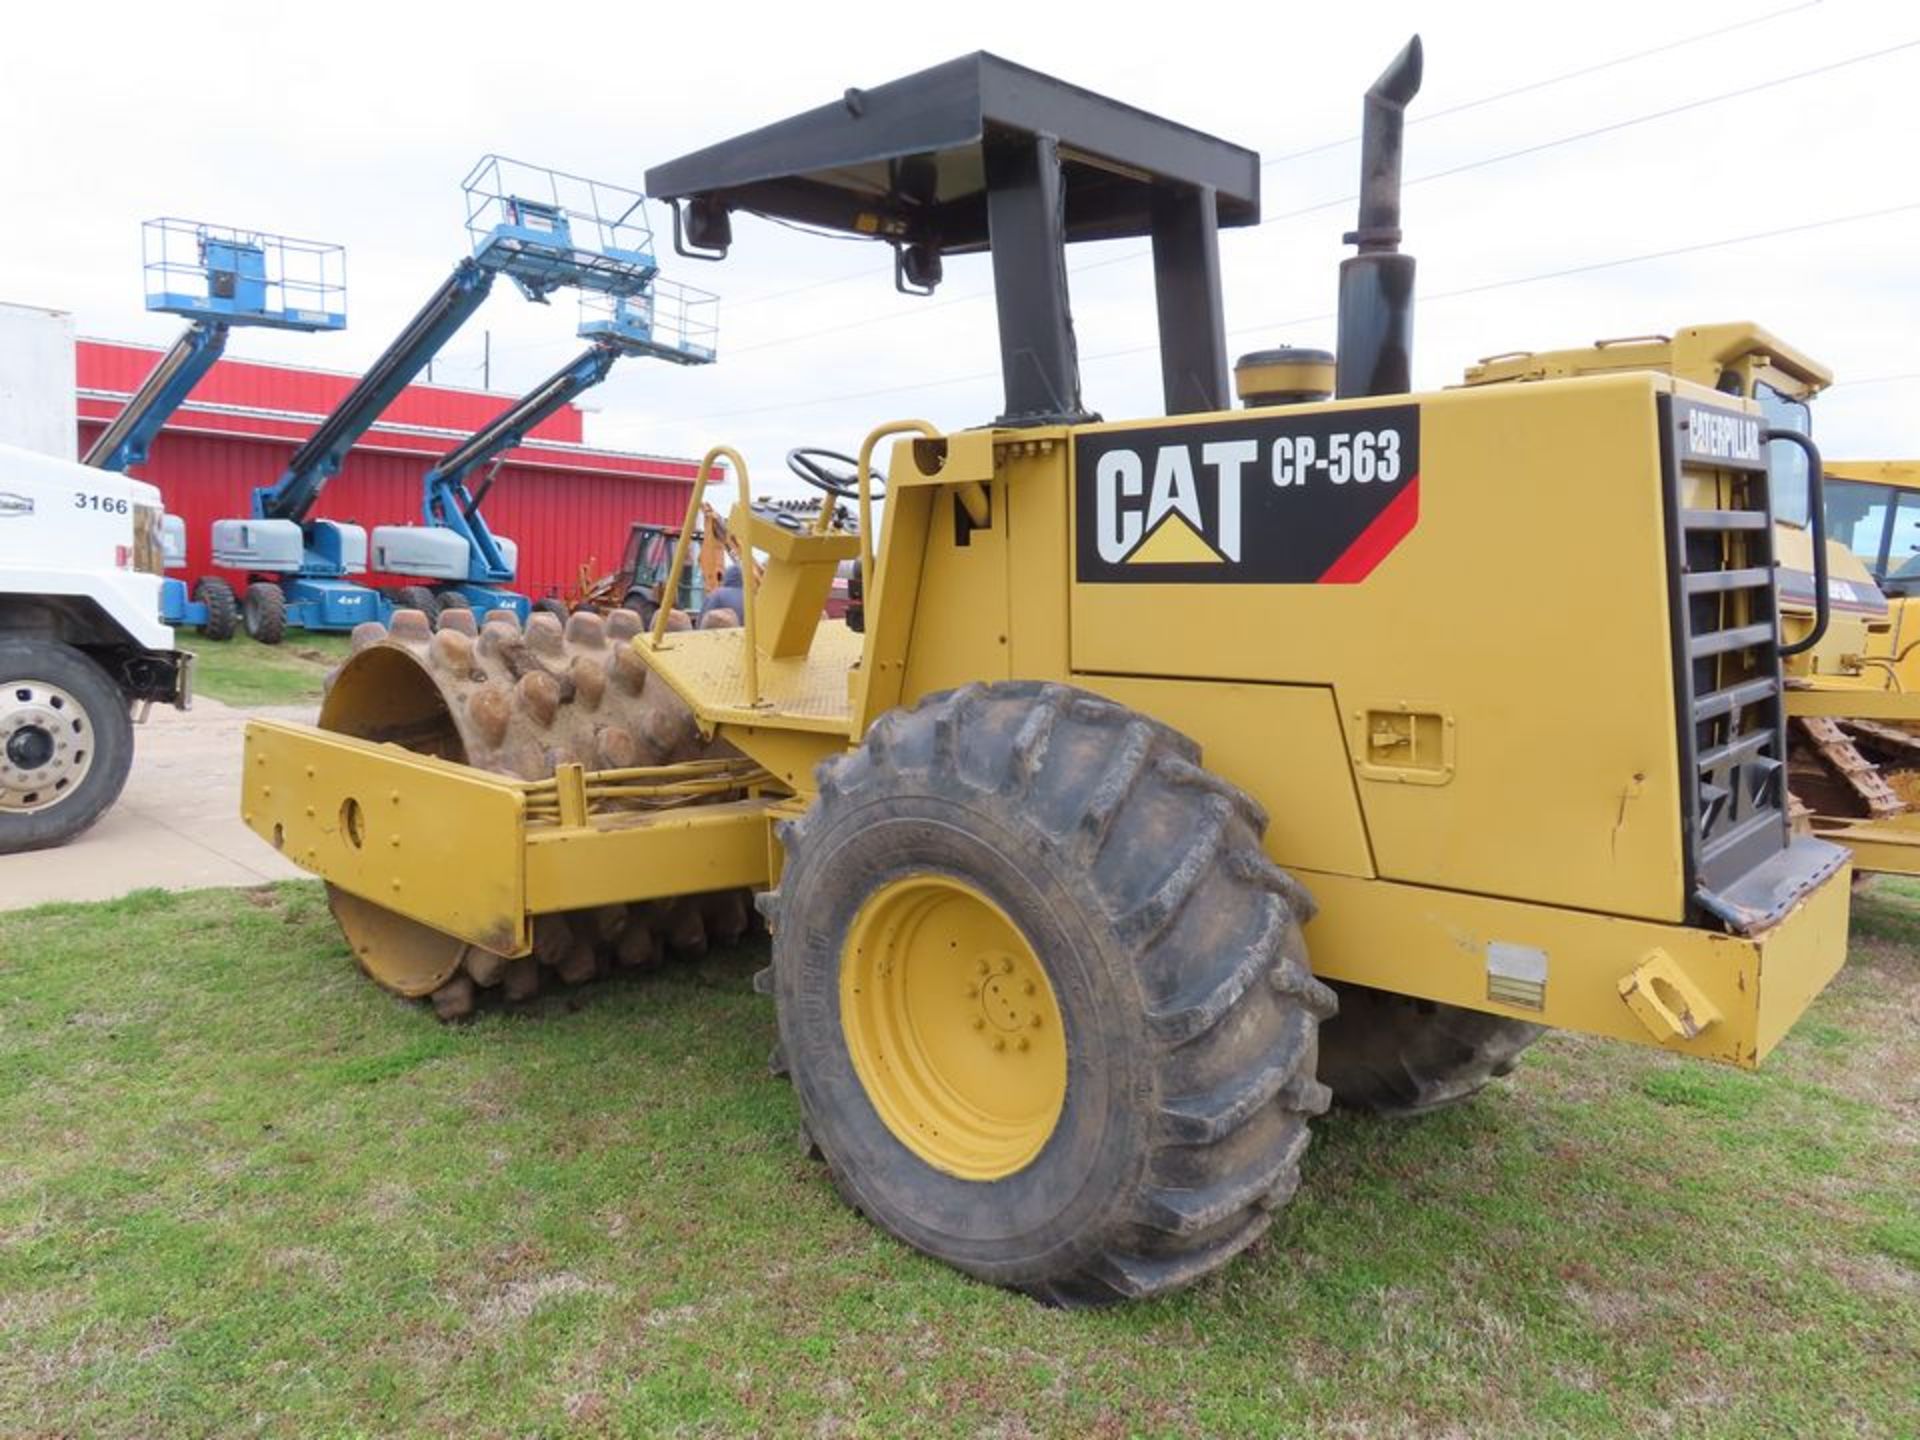 1991 CATERPILLAR VIBRATORY COMPACTOR, M# CP-563, S/N 1YJ00173, APPROX. 7,716 HOURS, ARTICULATED, 84" - Image 4 of 4